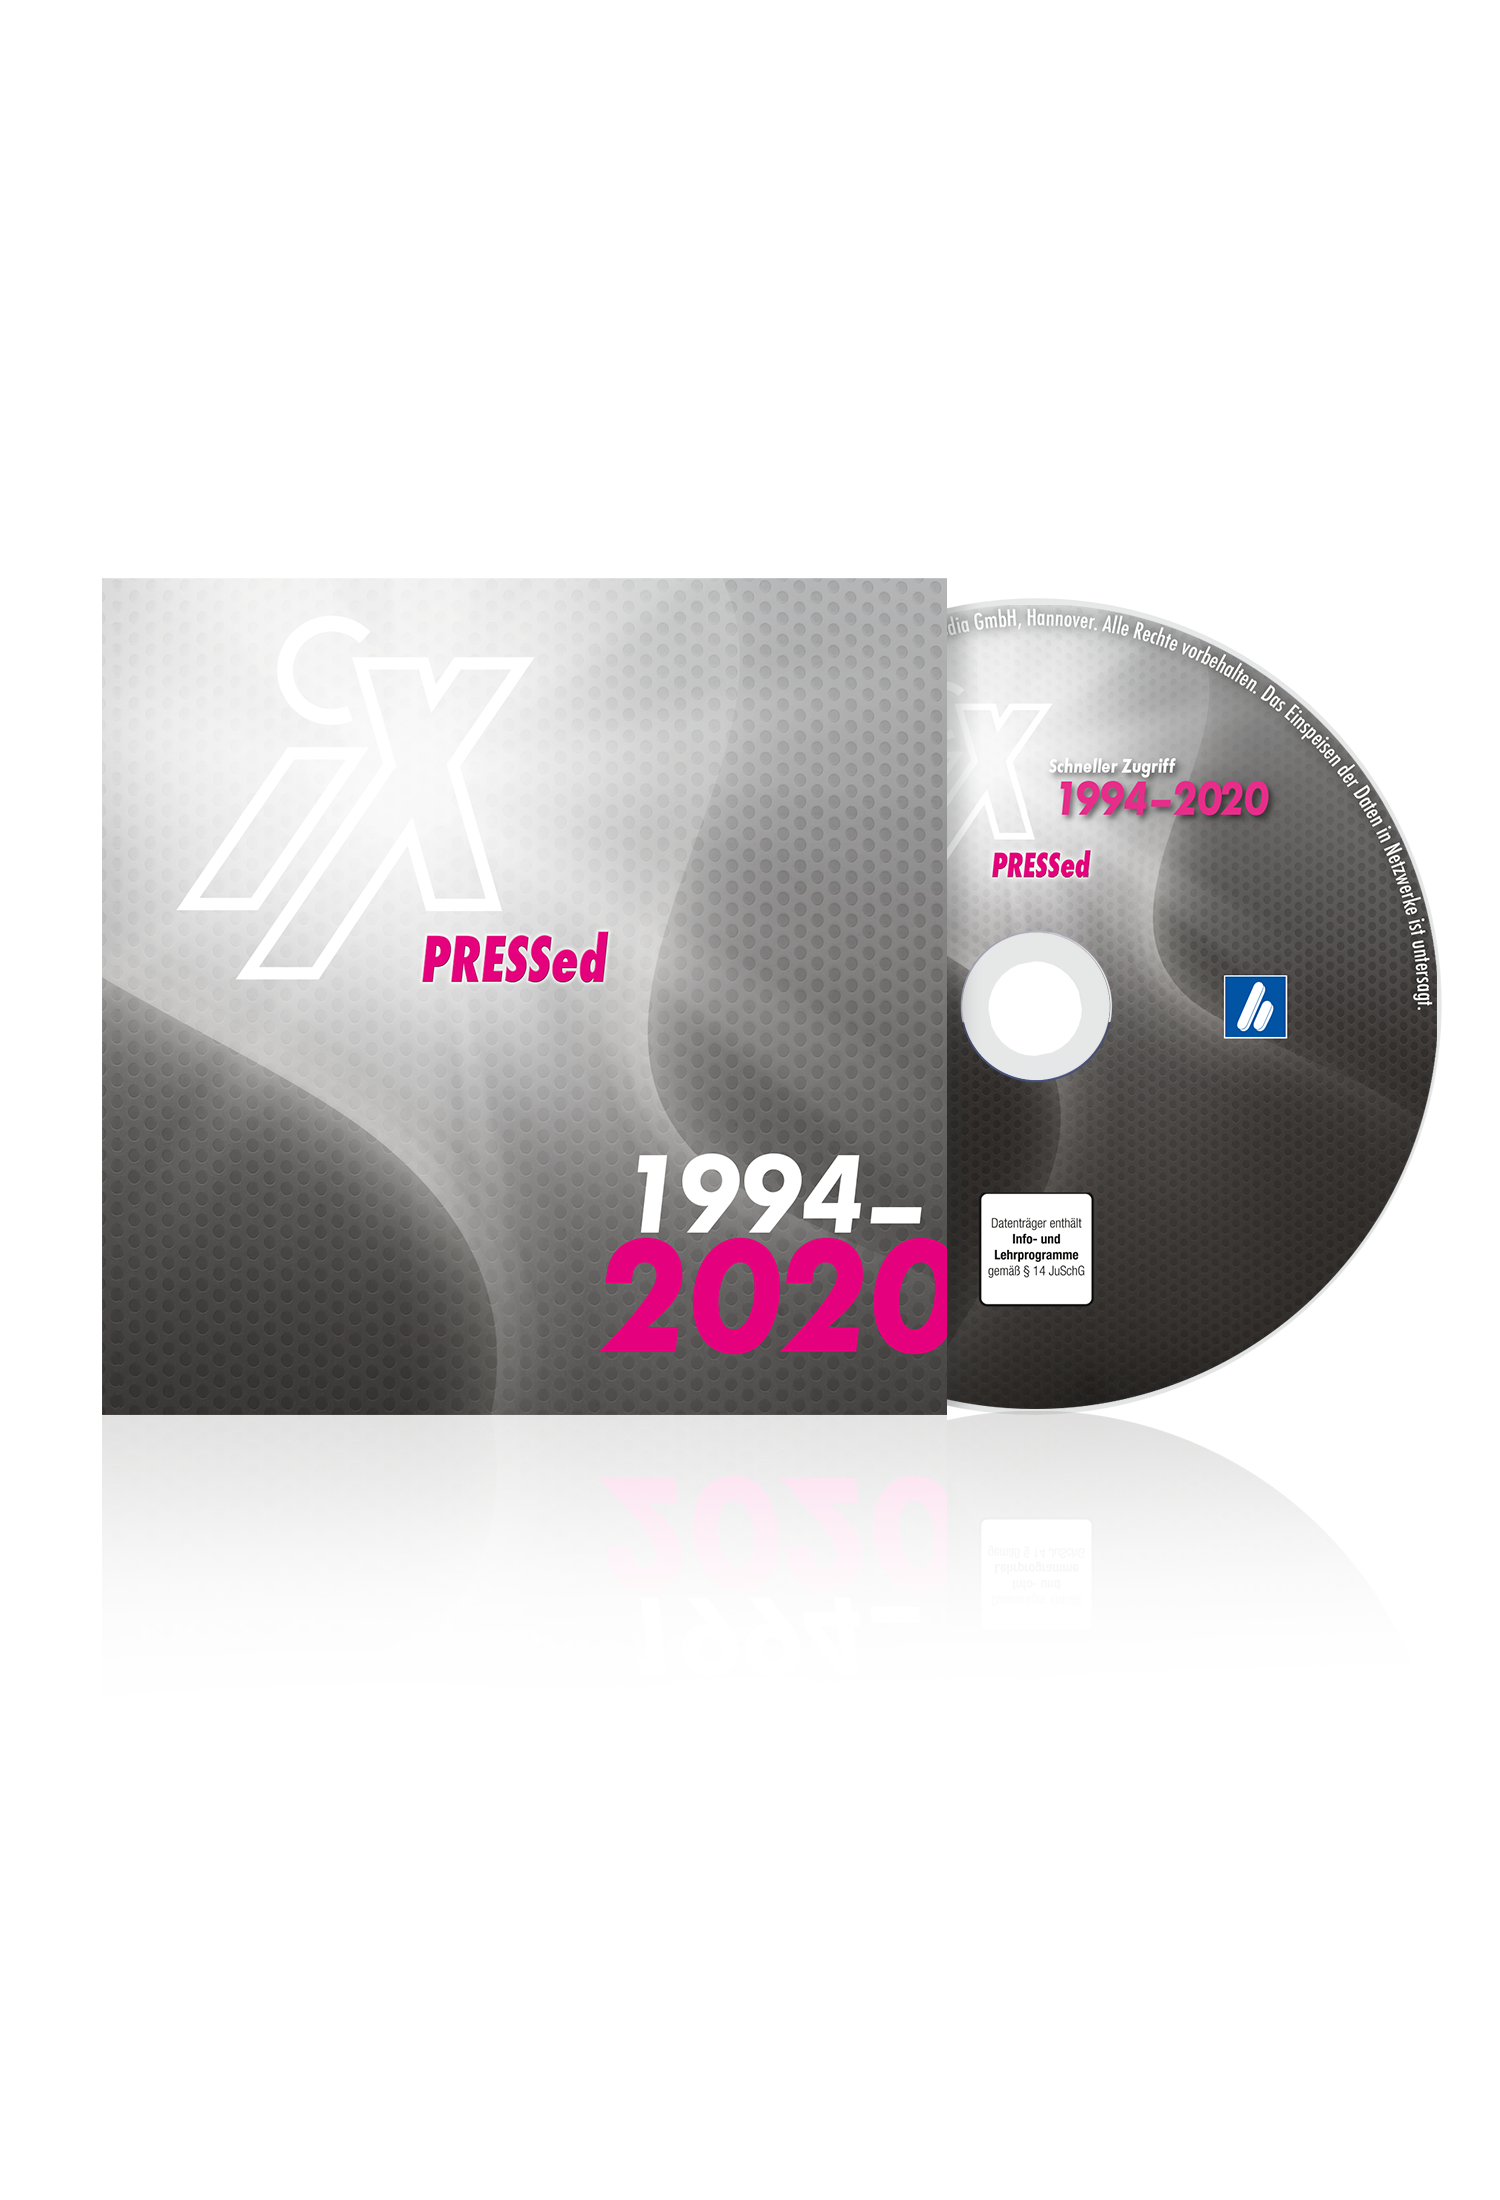 iXPRESSed 1994-2020 DVD